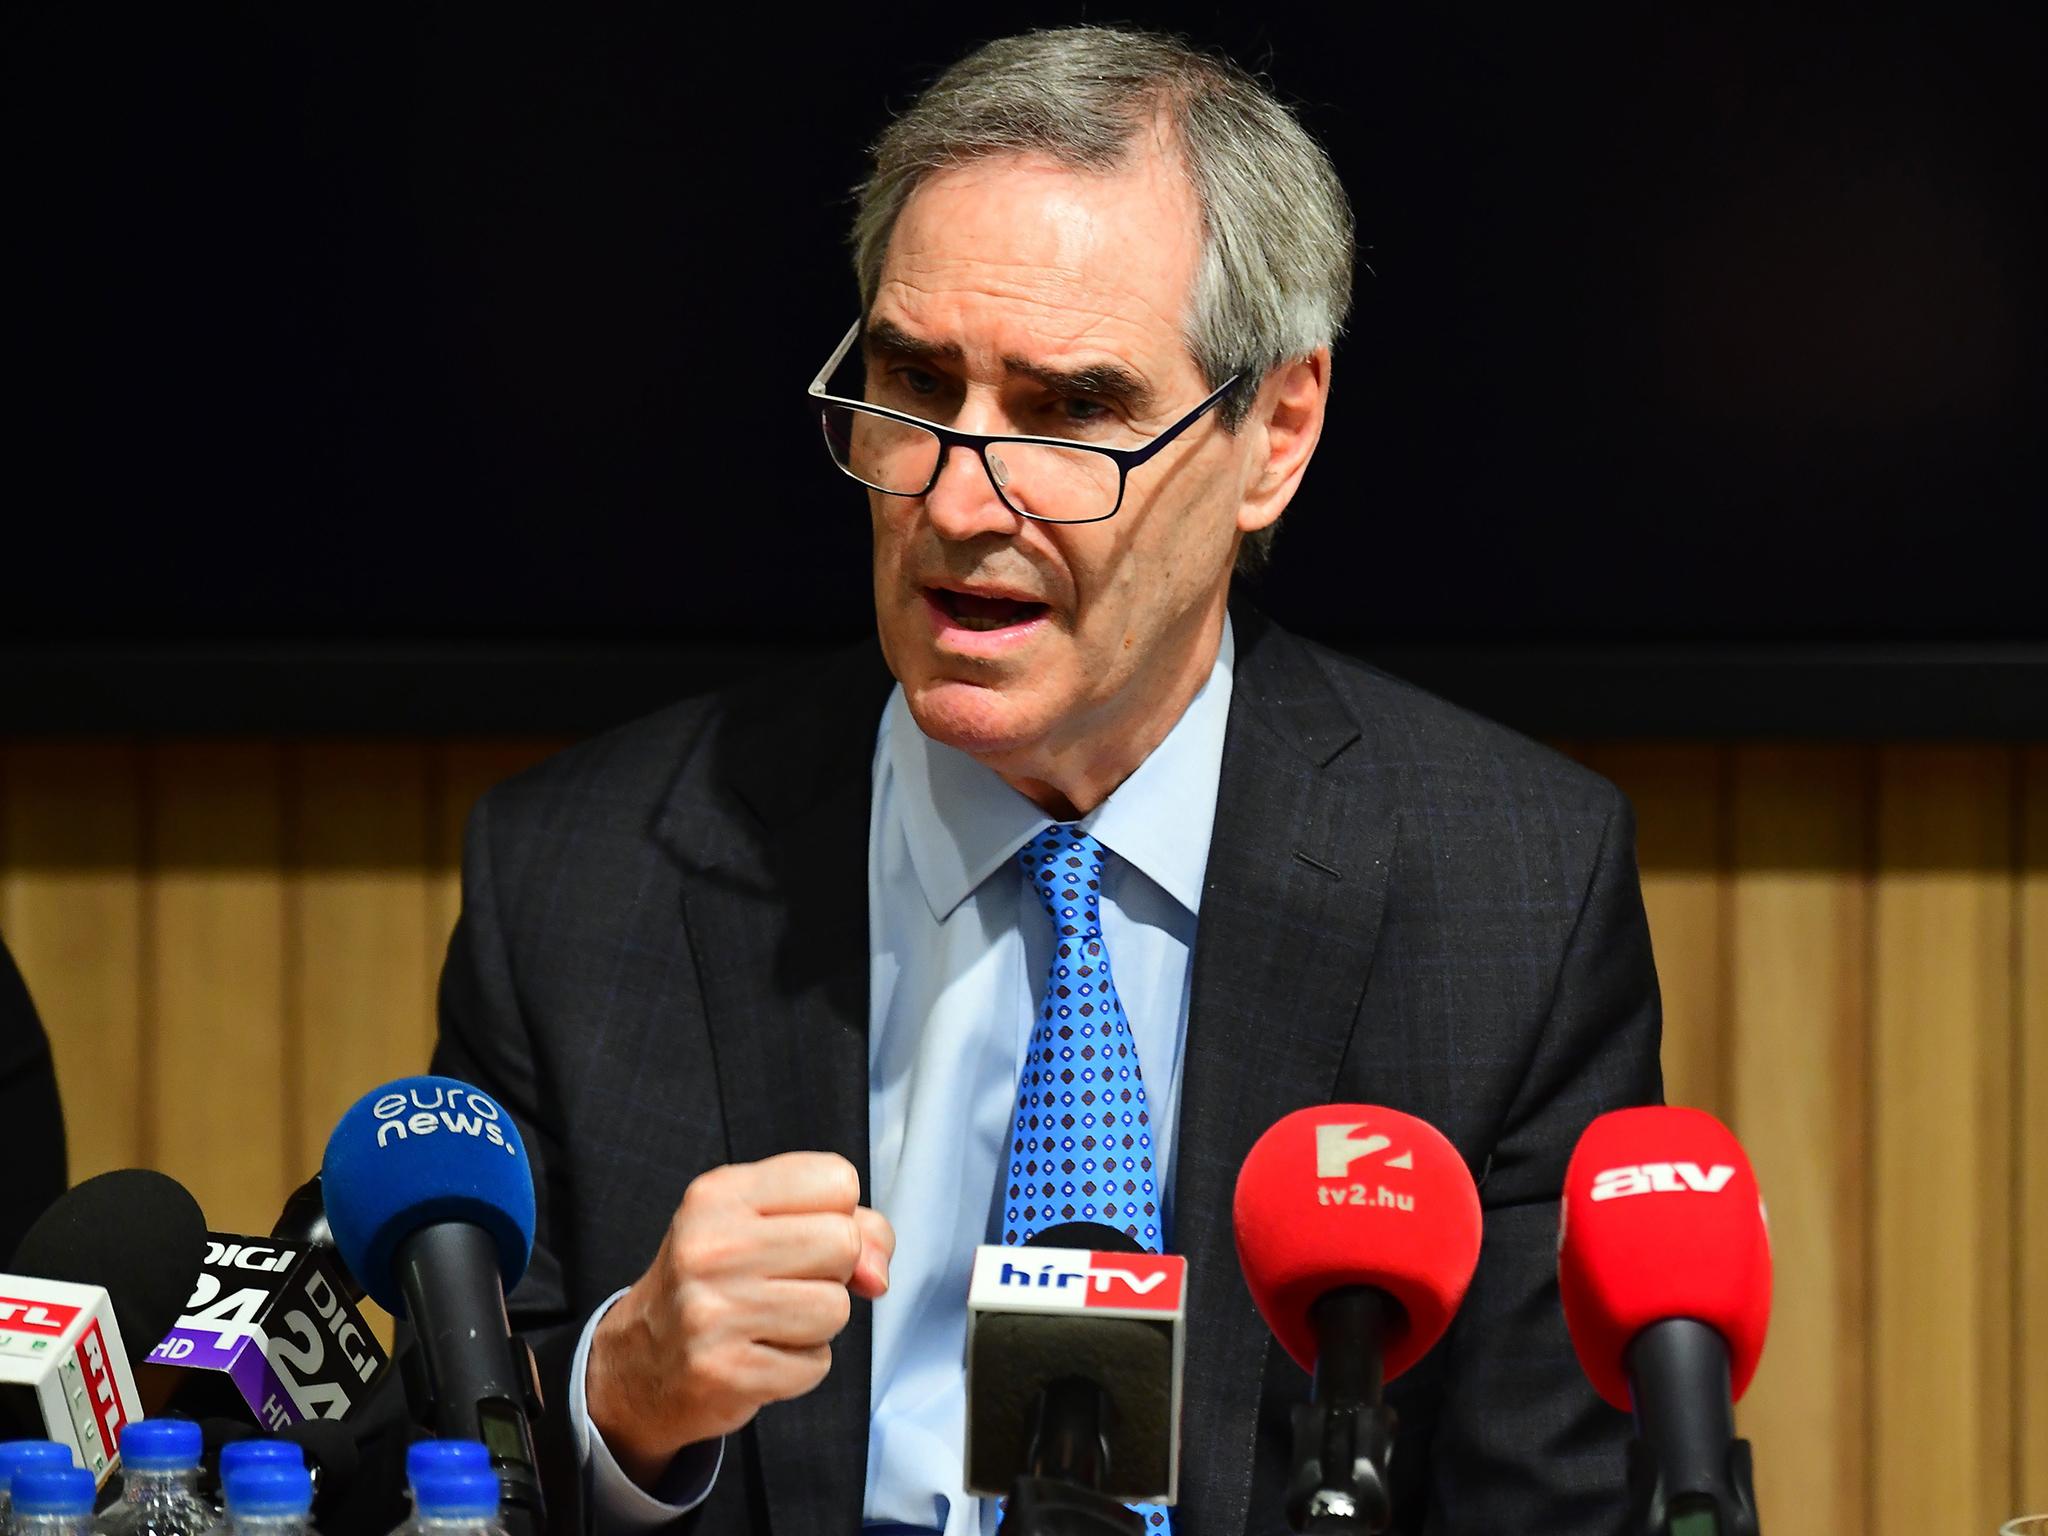 President and Rector of the Central European University (CEU) Michael Ignatieff speaks during a press conference in Budapest